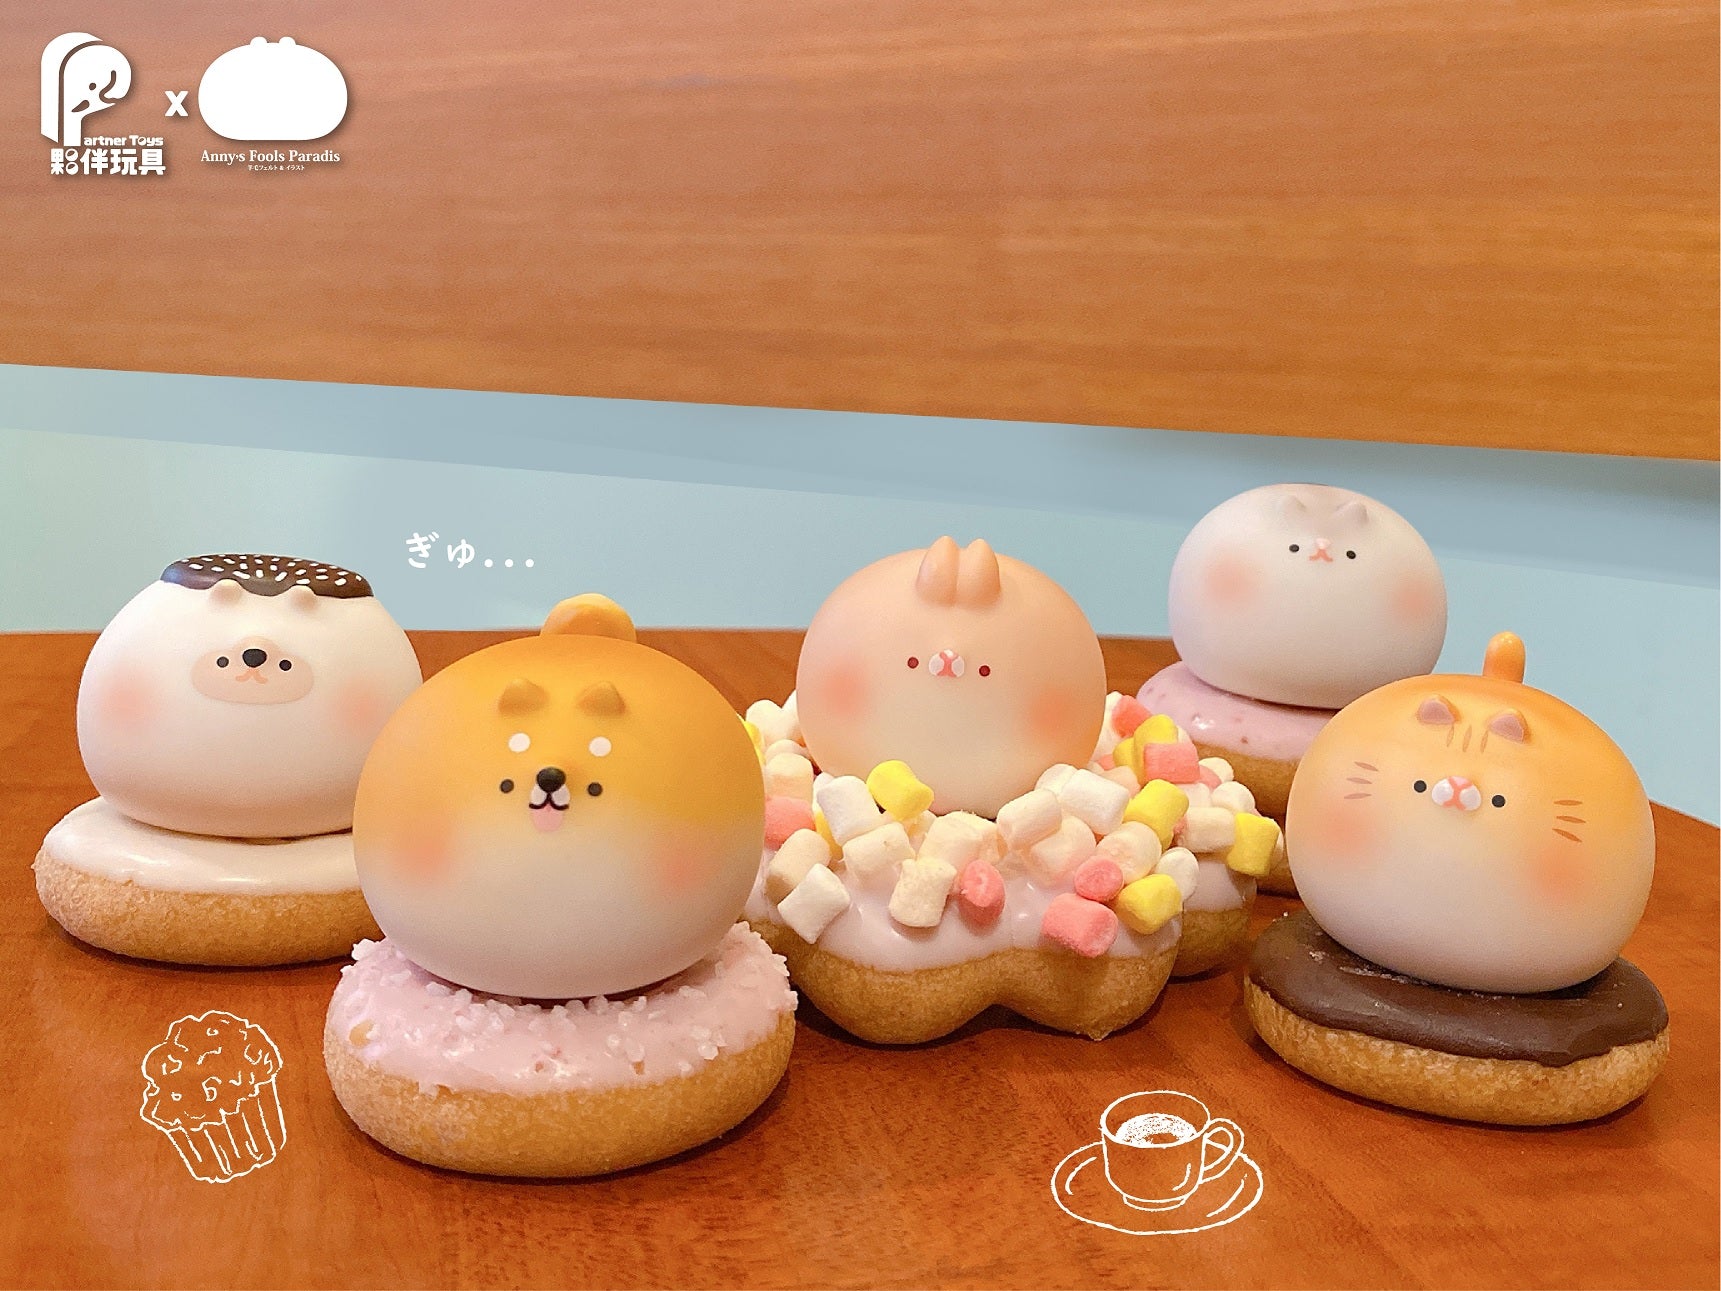 Family Pet Dango toy on donuts with cartoon faces, a cupcake drawing, and a coffee cup drawing.